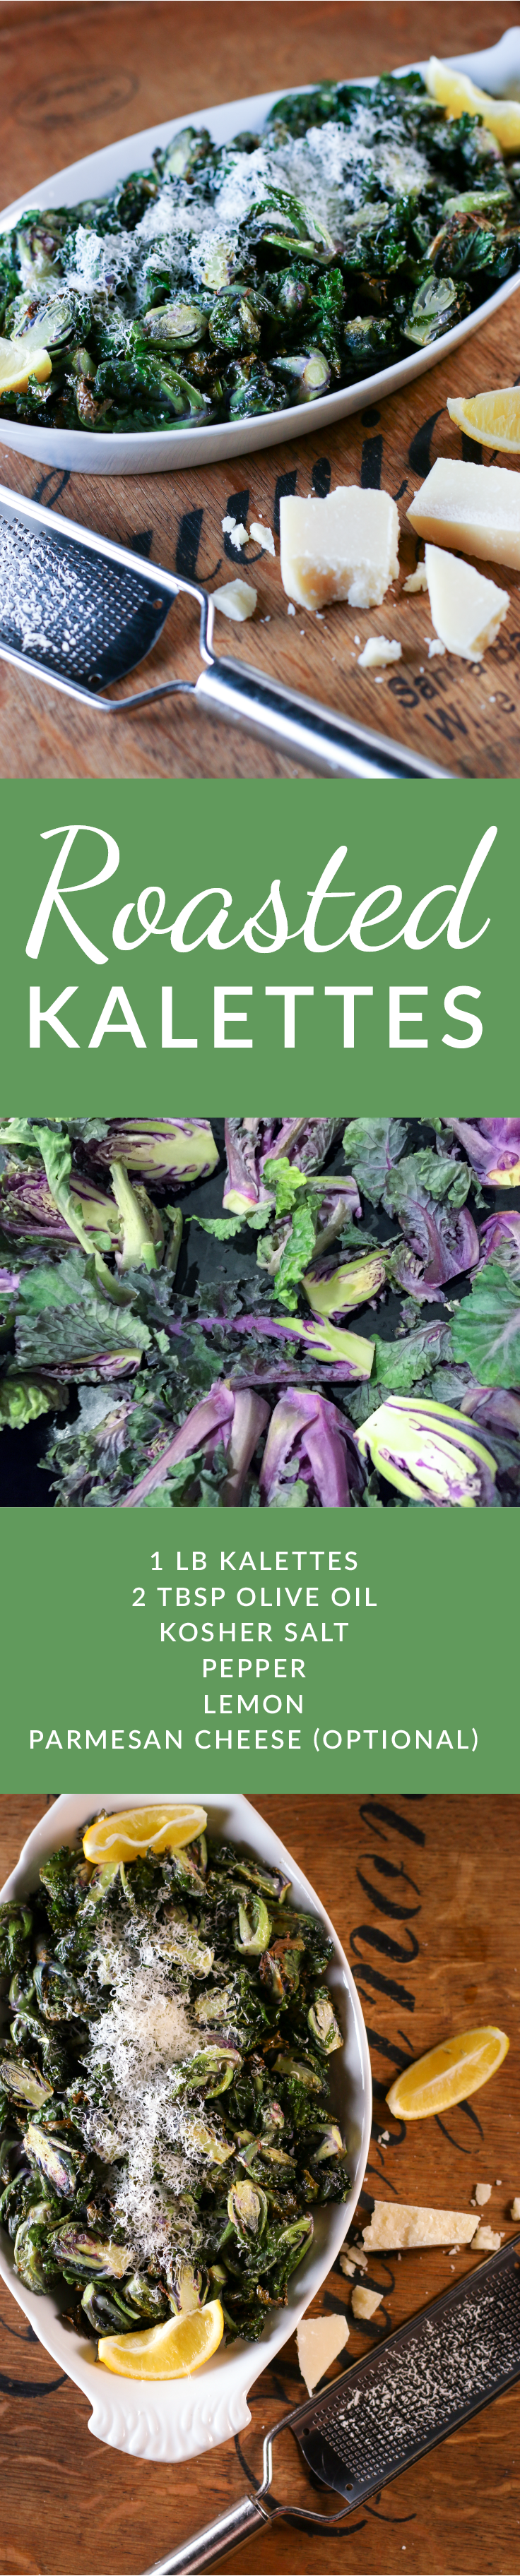 Roasting kalettes is a quick, easy and delicious way to prepare this healthy new hybrid. A perfect dish to boost your vegetable intake for a weeknight meal.